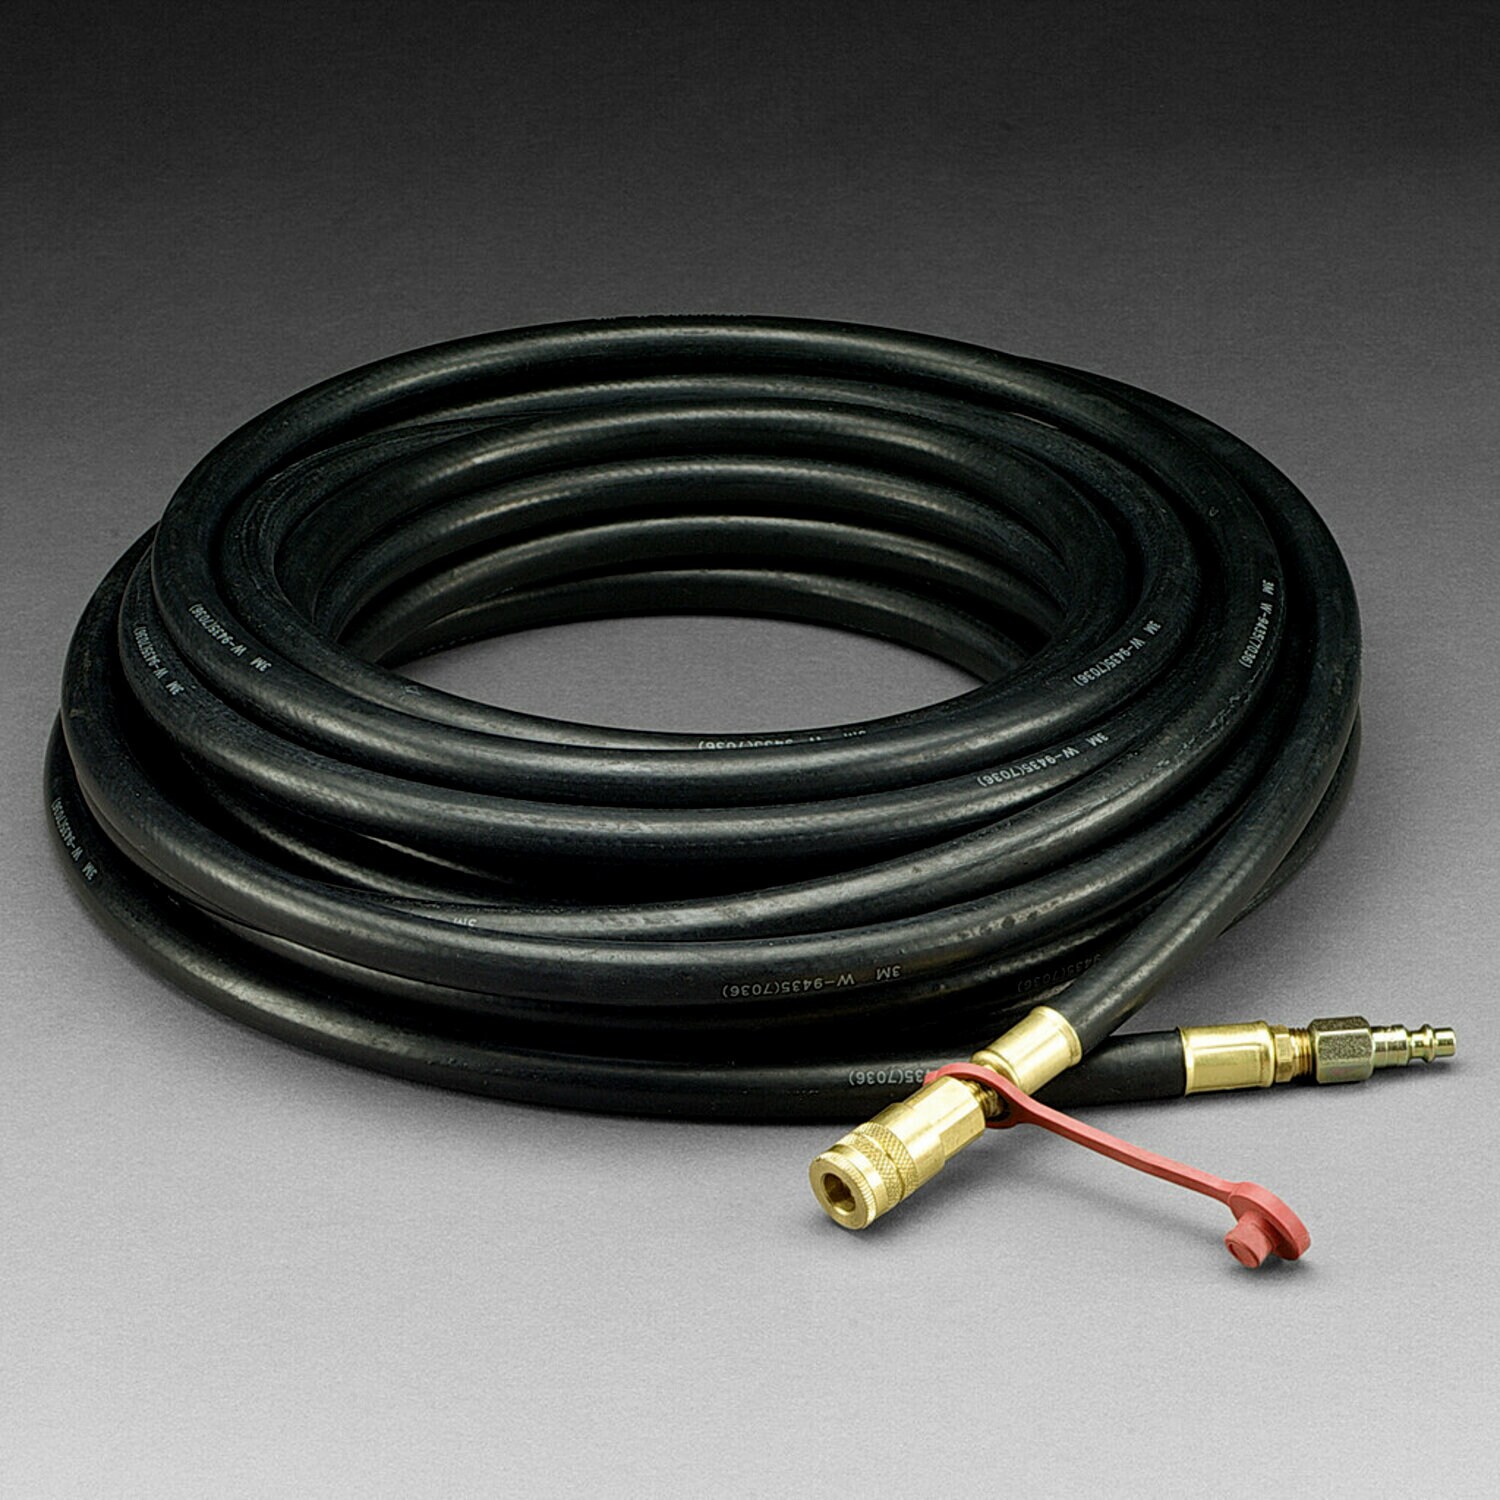 7000005373 - 3M Supplied Air Respirator Hose W-9435-50/07011(AAD), 1 EA/Case